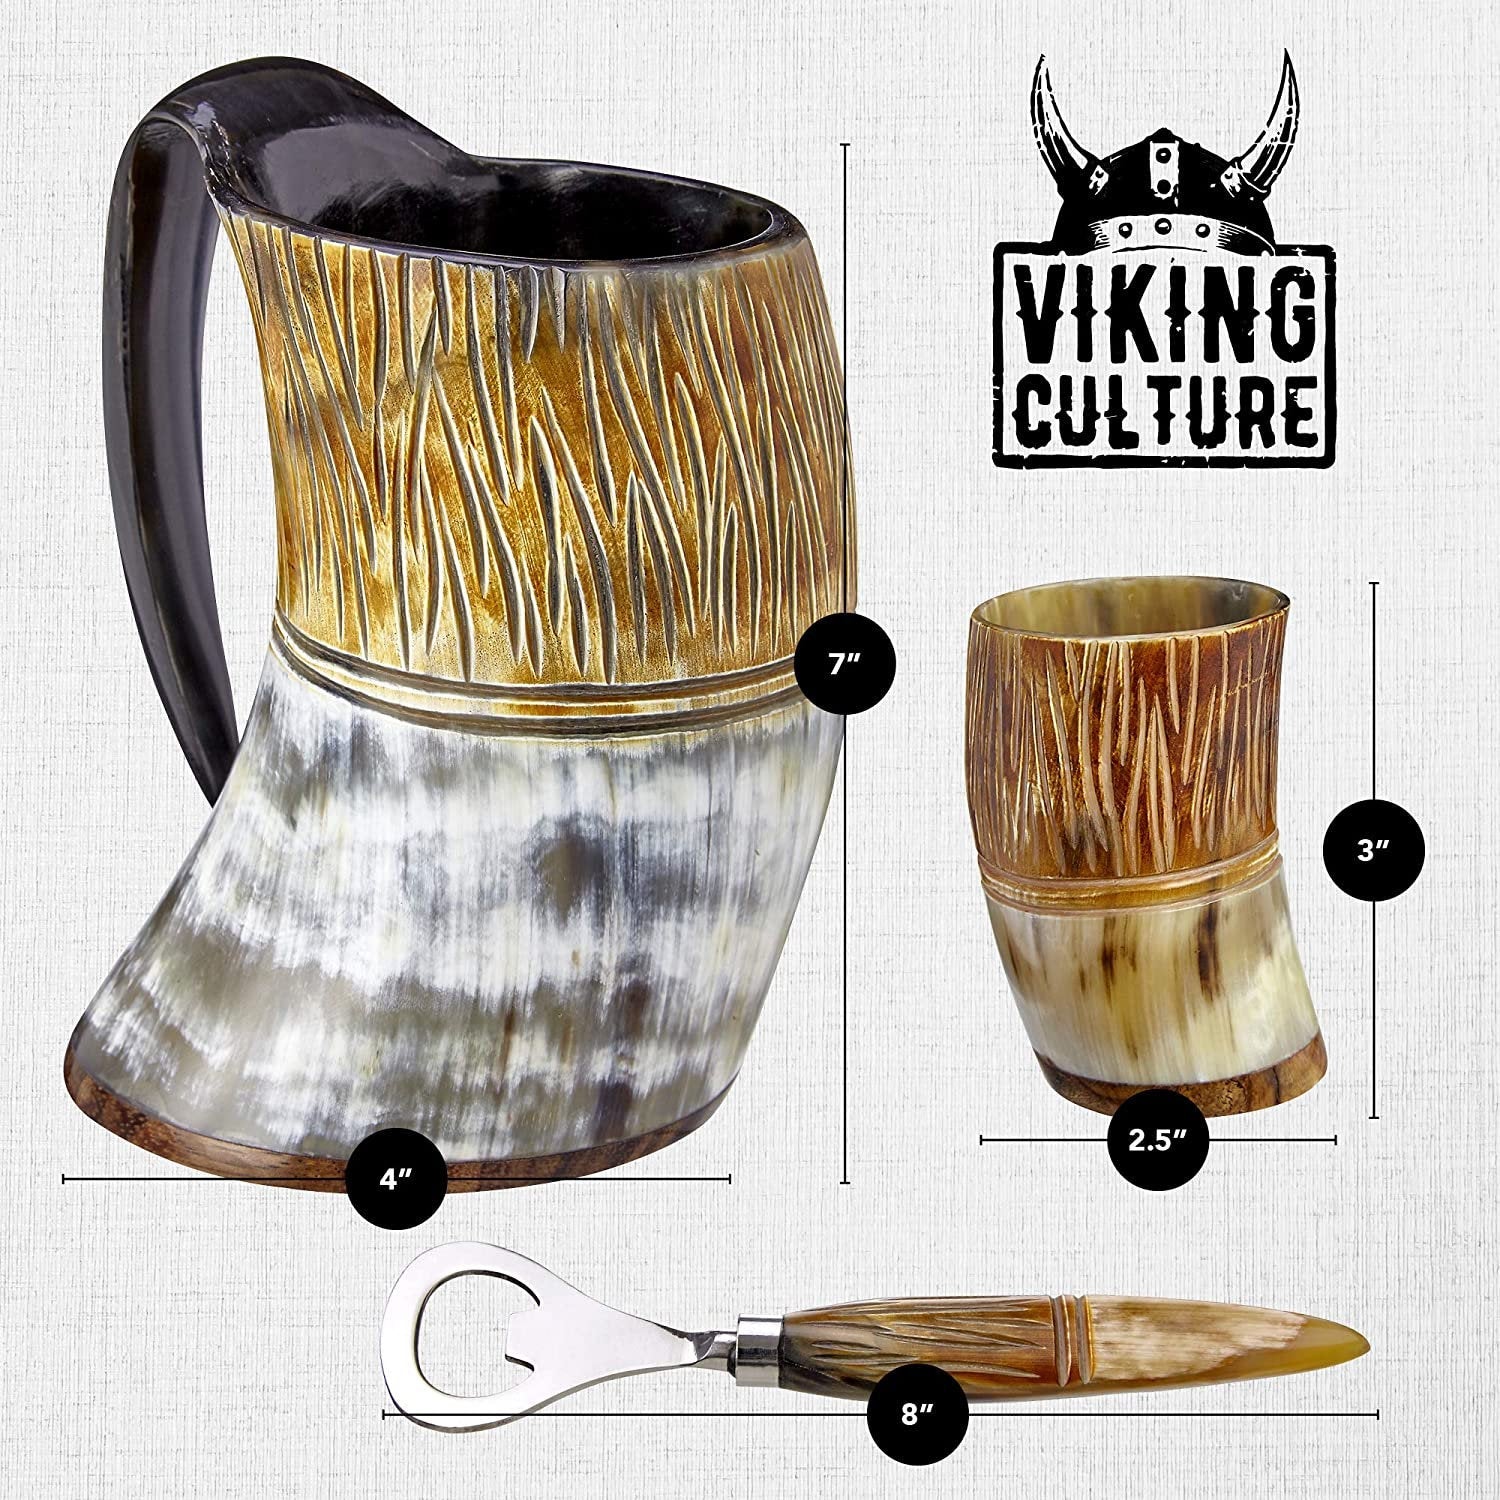 Viking Culture Ox Horn Mug, Shot Glass, and Bottle Opener (3 Pc. Set) Authentic 16-oz. Beer Tankard | Vintage Stein with Handle, The Jarl